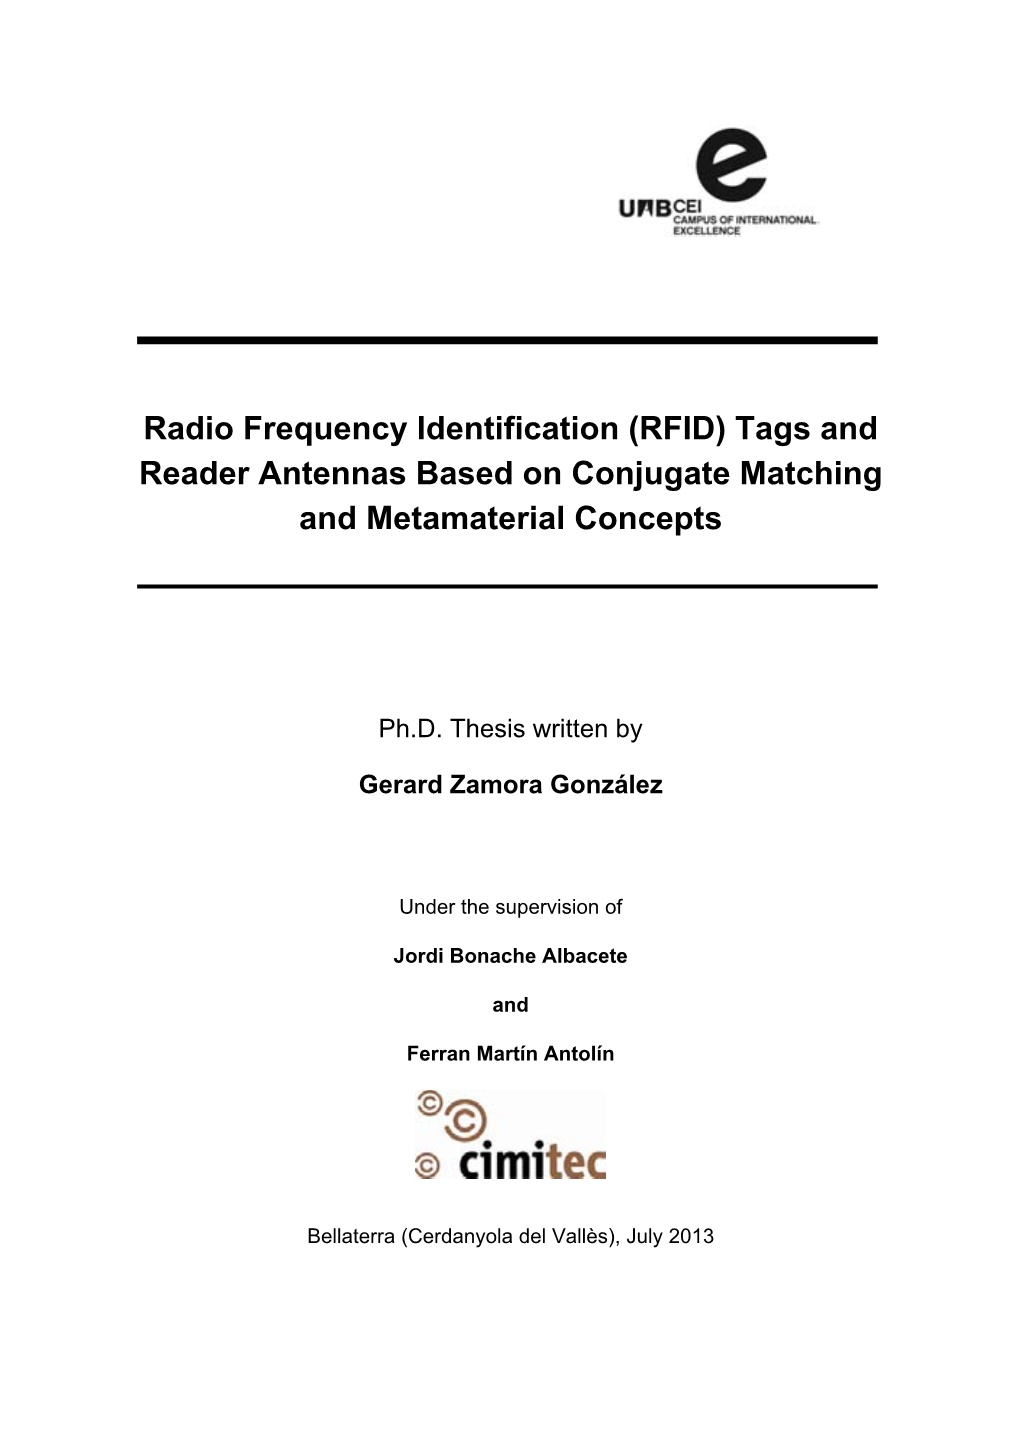 Radio Frequency Identification (RFID) Tags and Reader Antennas Based on Conjugate Matching and Metamaterial Concepts